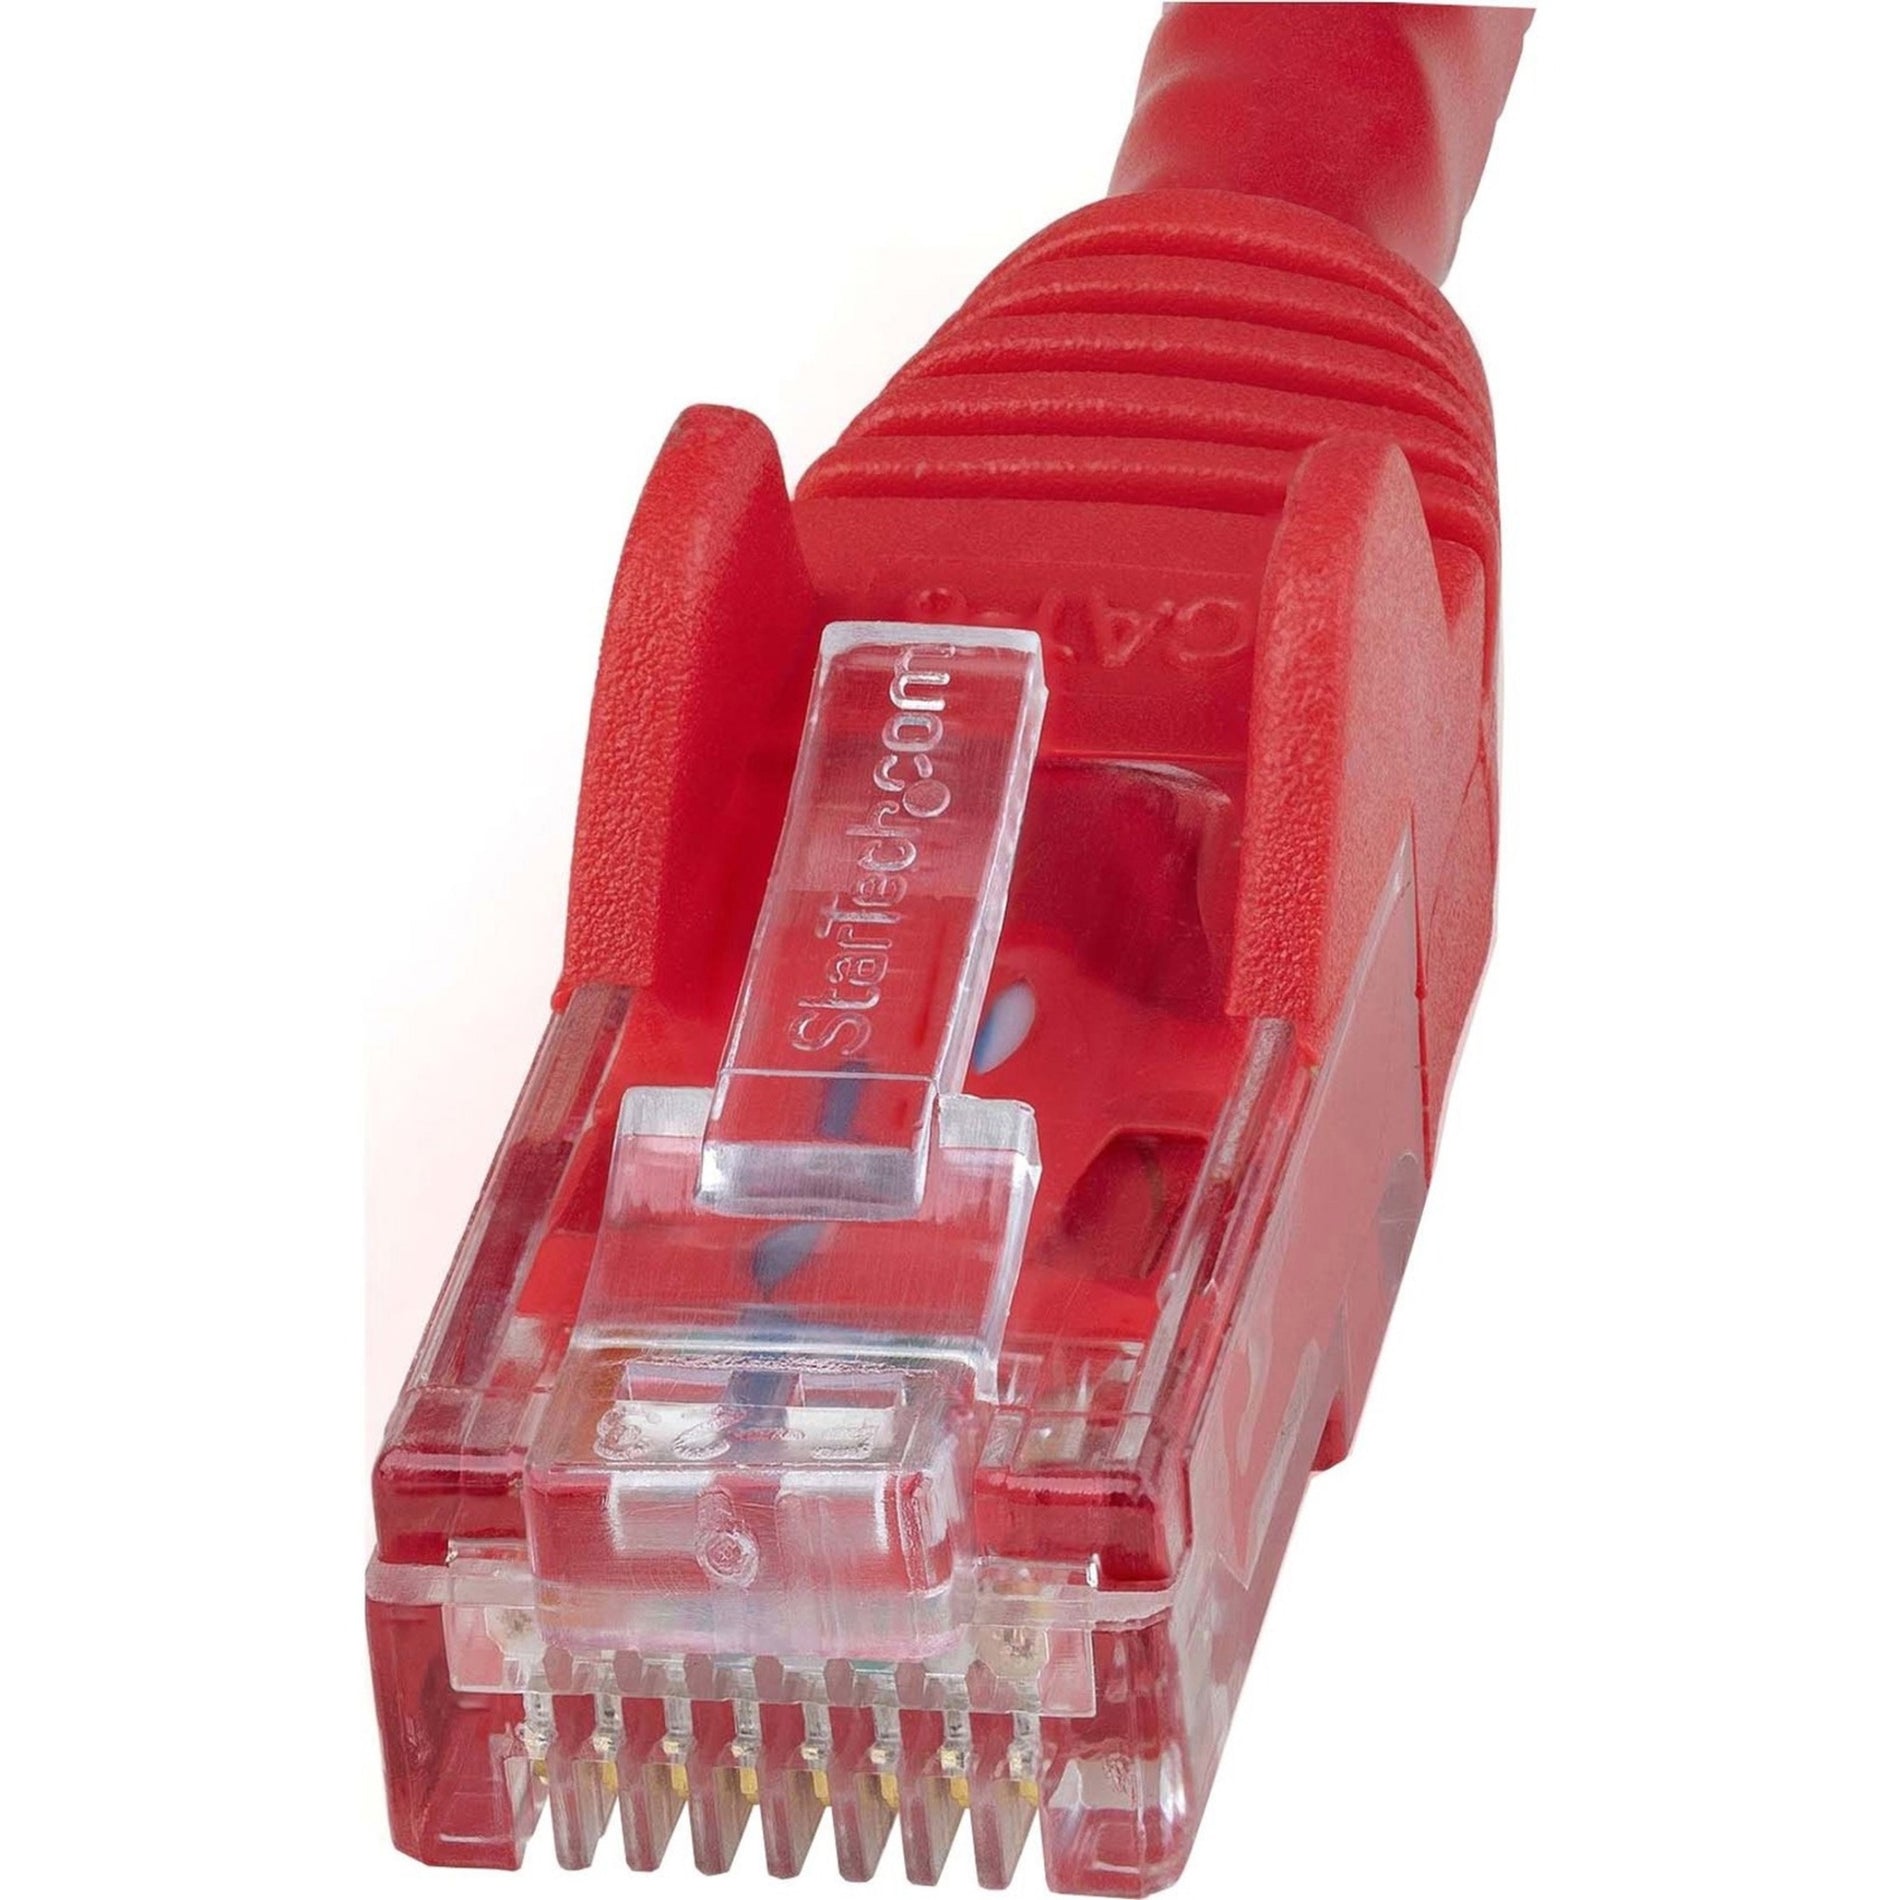 StarTech.com N6PATCH25RD 25 ft Red Snagless Cat6 UTP Patch Cable, 10 Gbit/s Data Transfer Rate, Lifetime Warranty